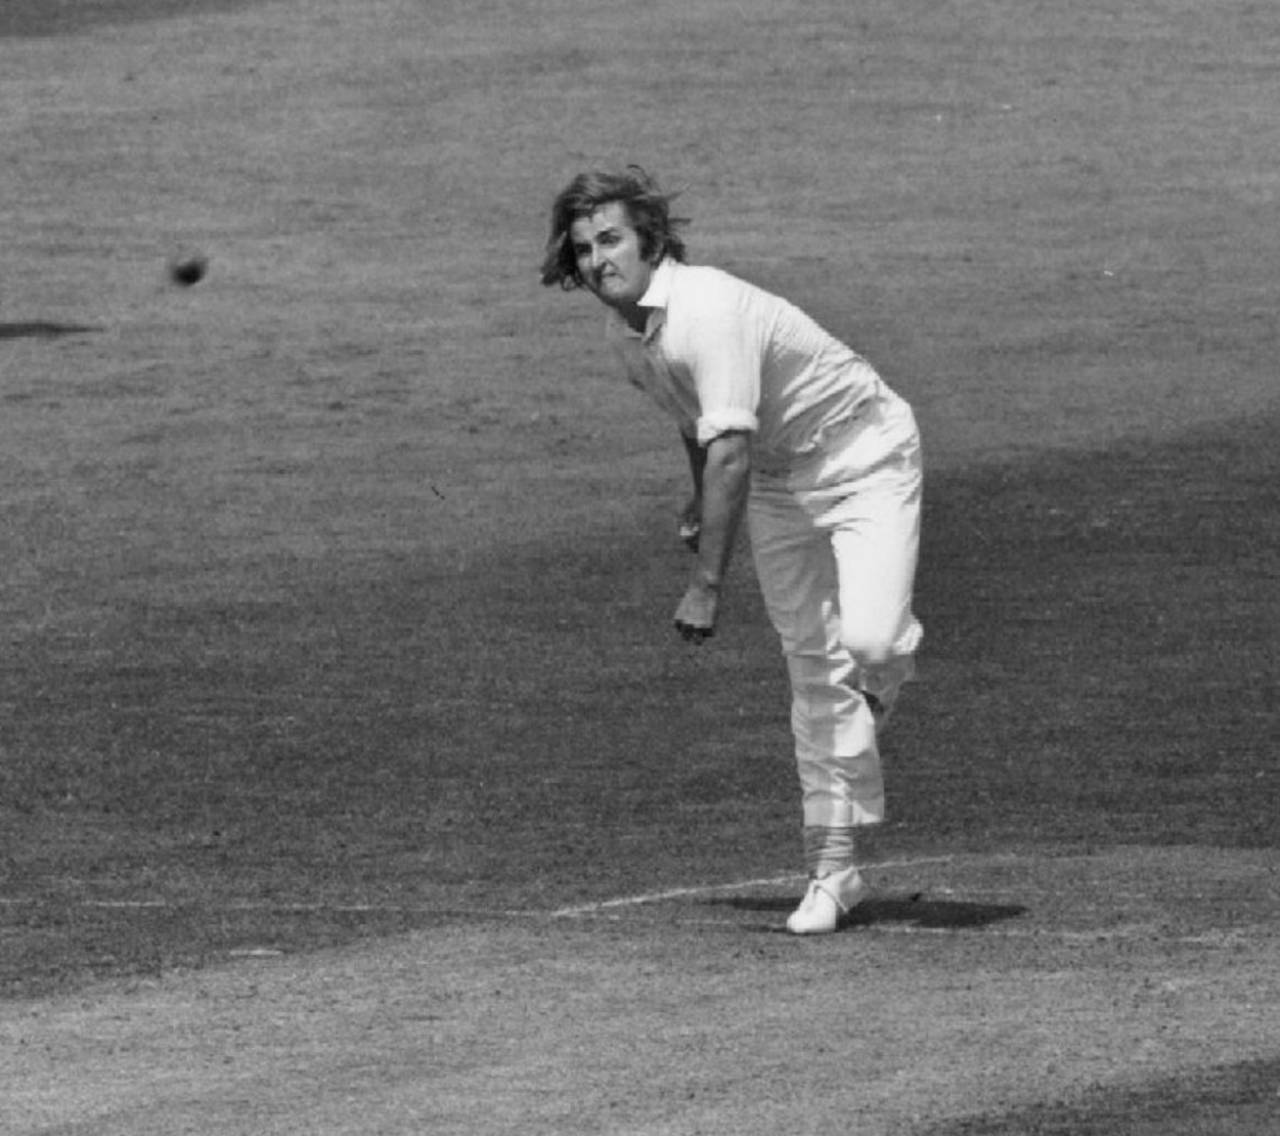 Gary Gilmour took an amazing 11 wickets in the semi-final and final of the 1975 World Cup&nbsp;&nbsp;&bull;&nbsp;&nbsp;Getty Images